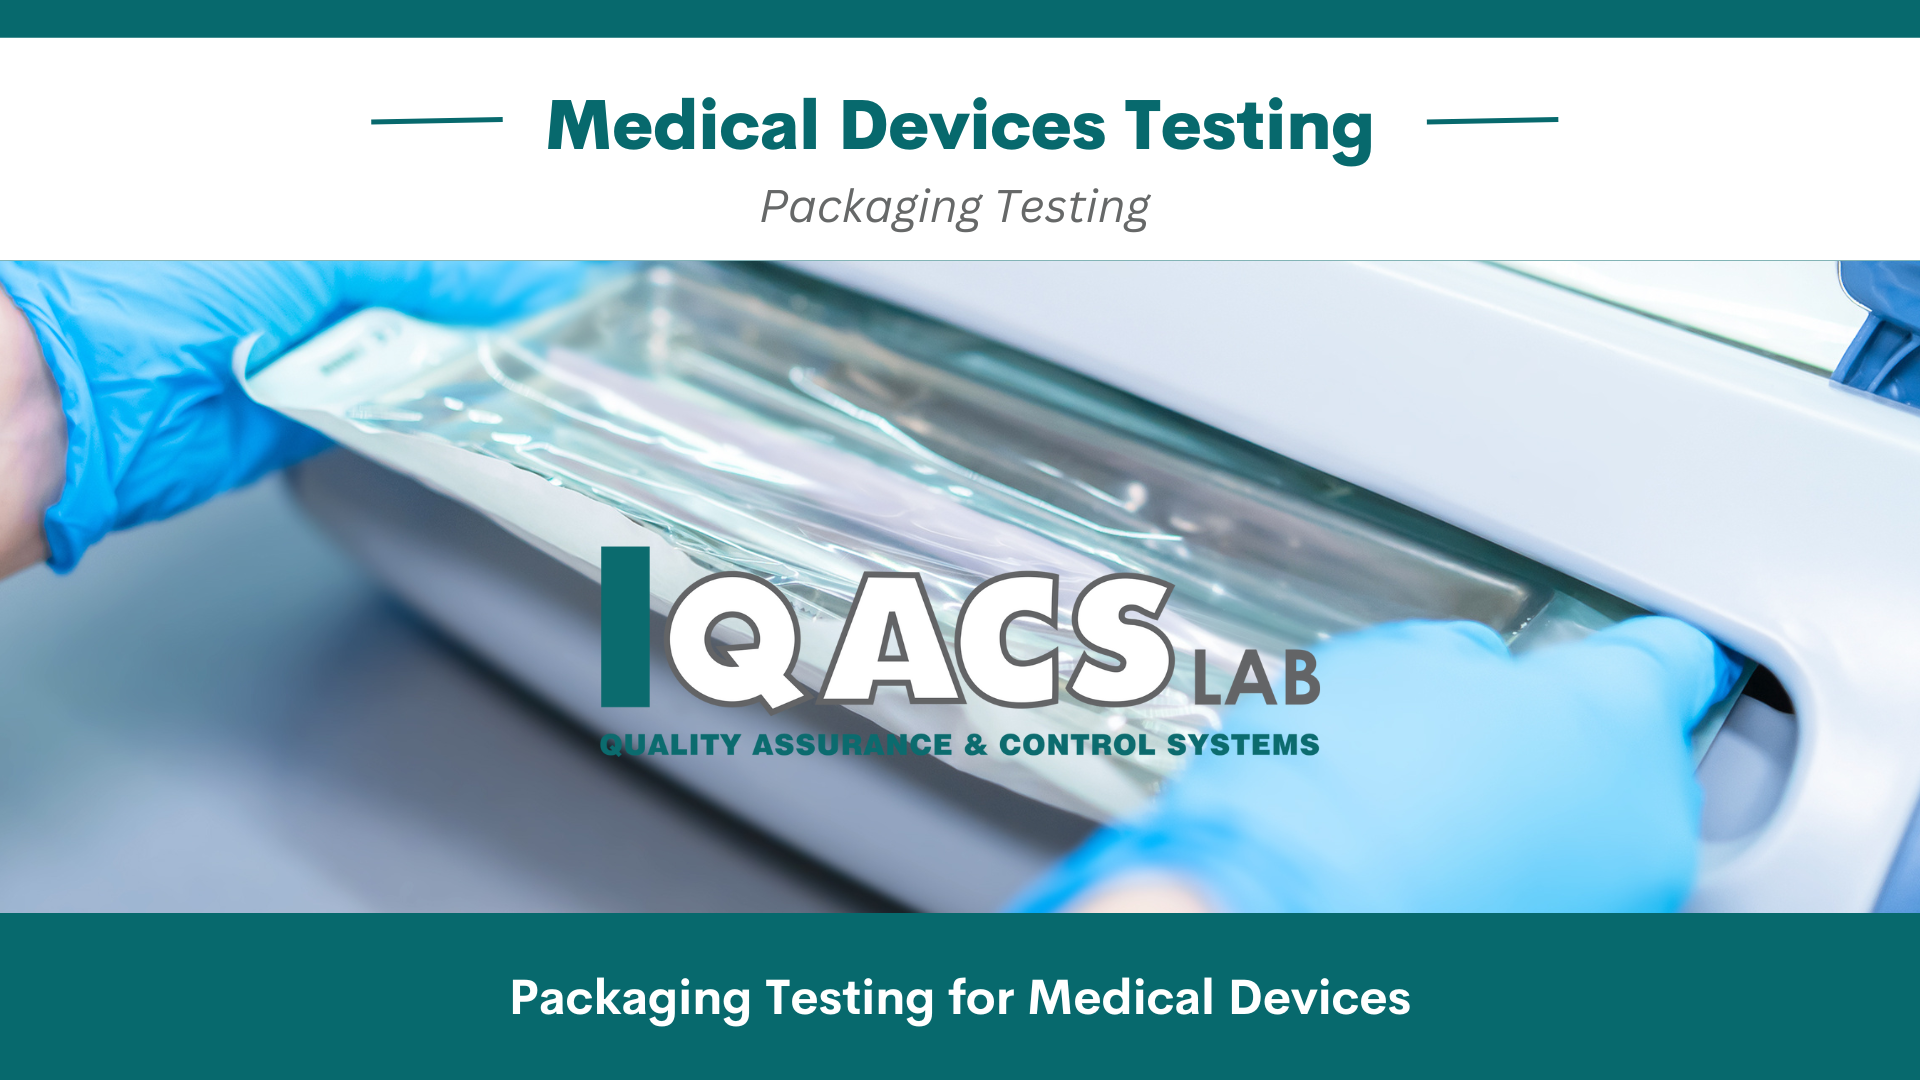 Packaging Testing for Medical Devices